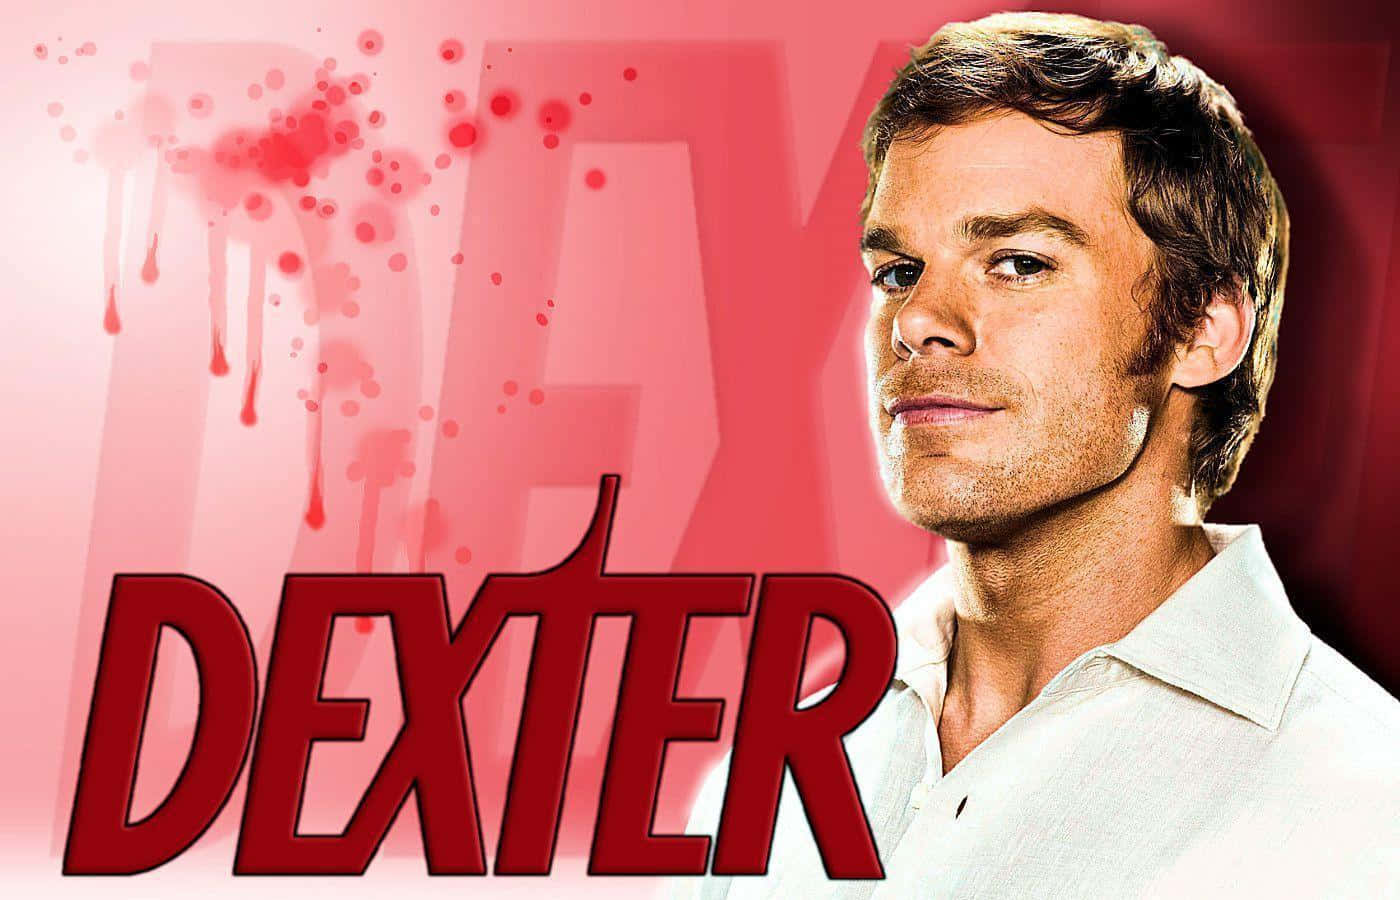 Michael C. Hall in his iconic role as Dexter Morgan Wallpaper